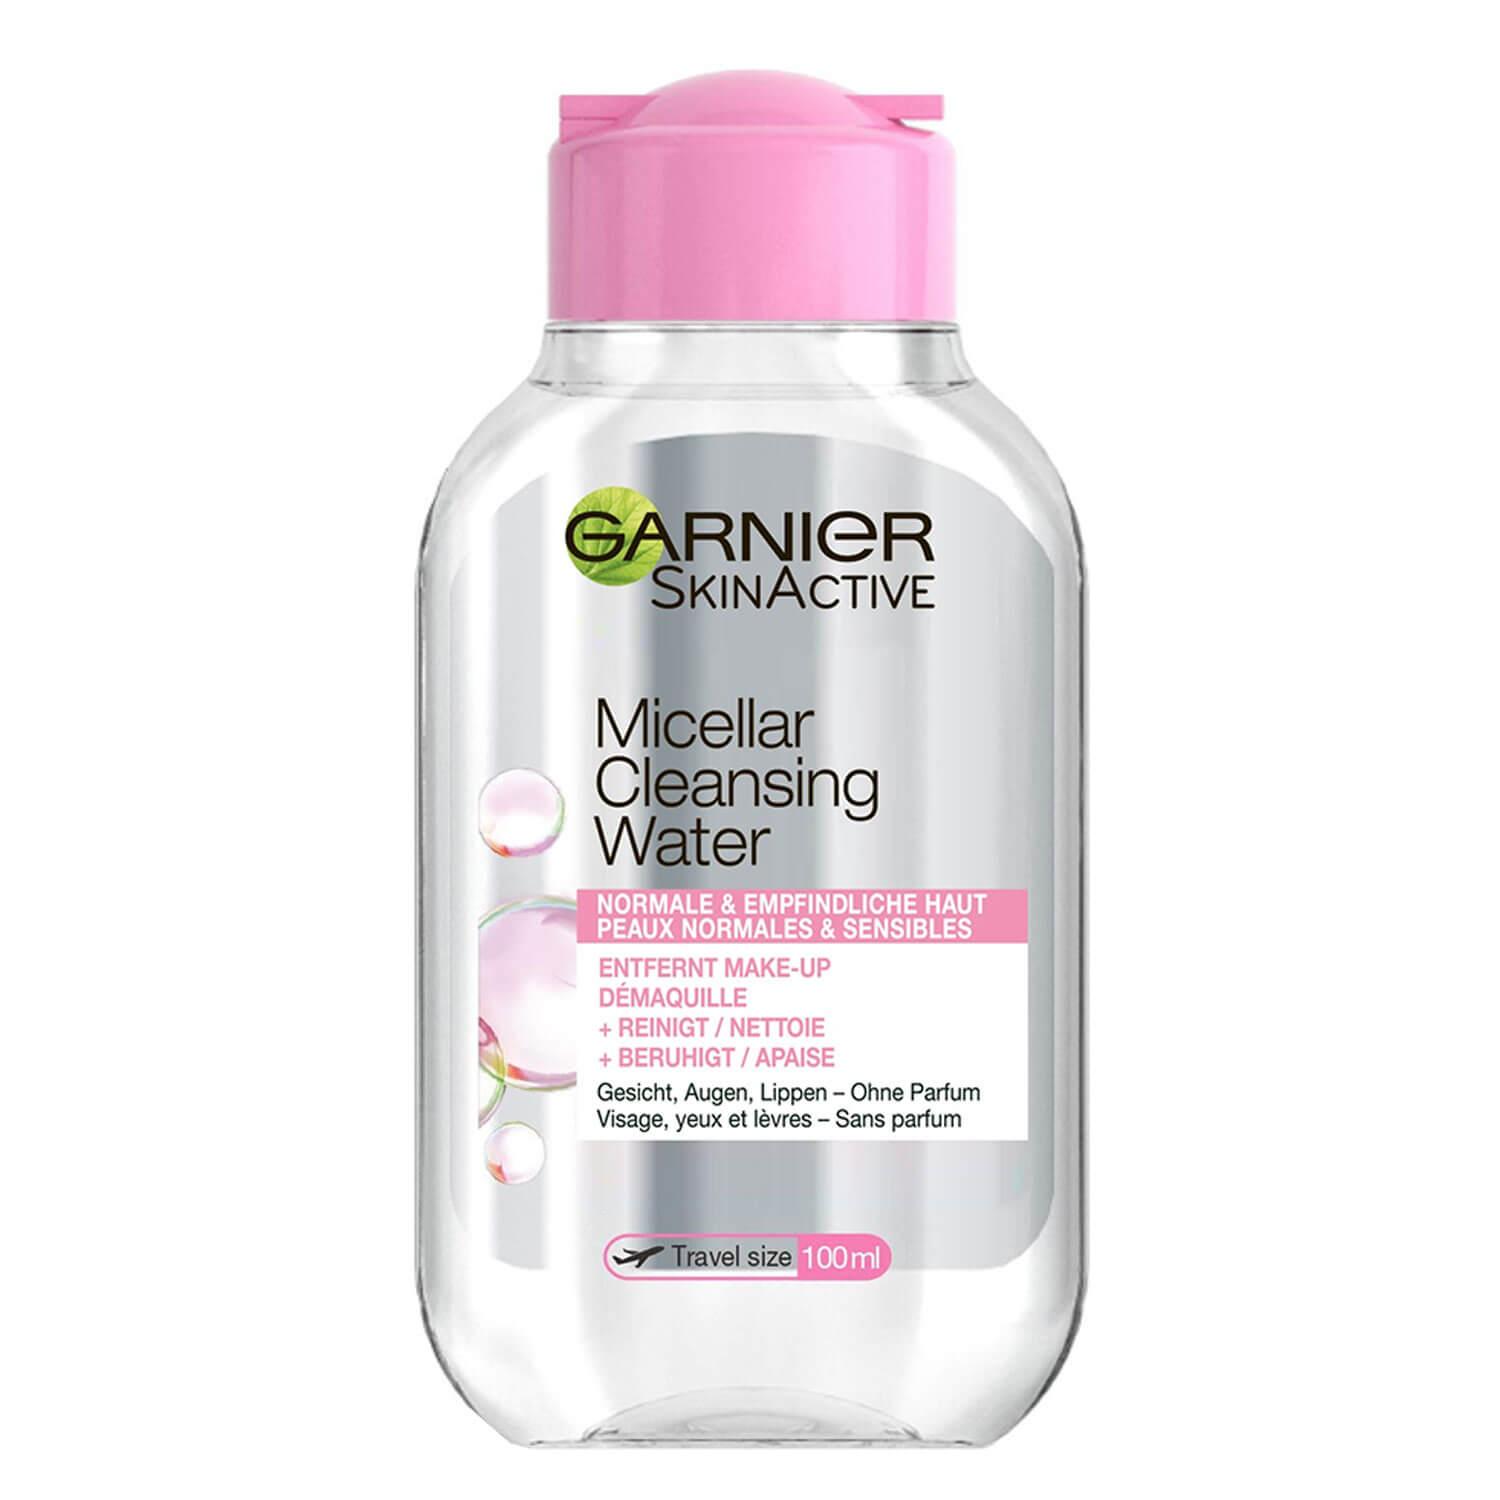 Skinactive Face - Micellar Cleansing Water